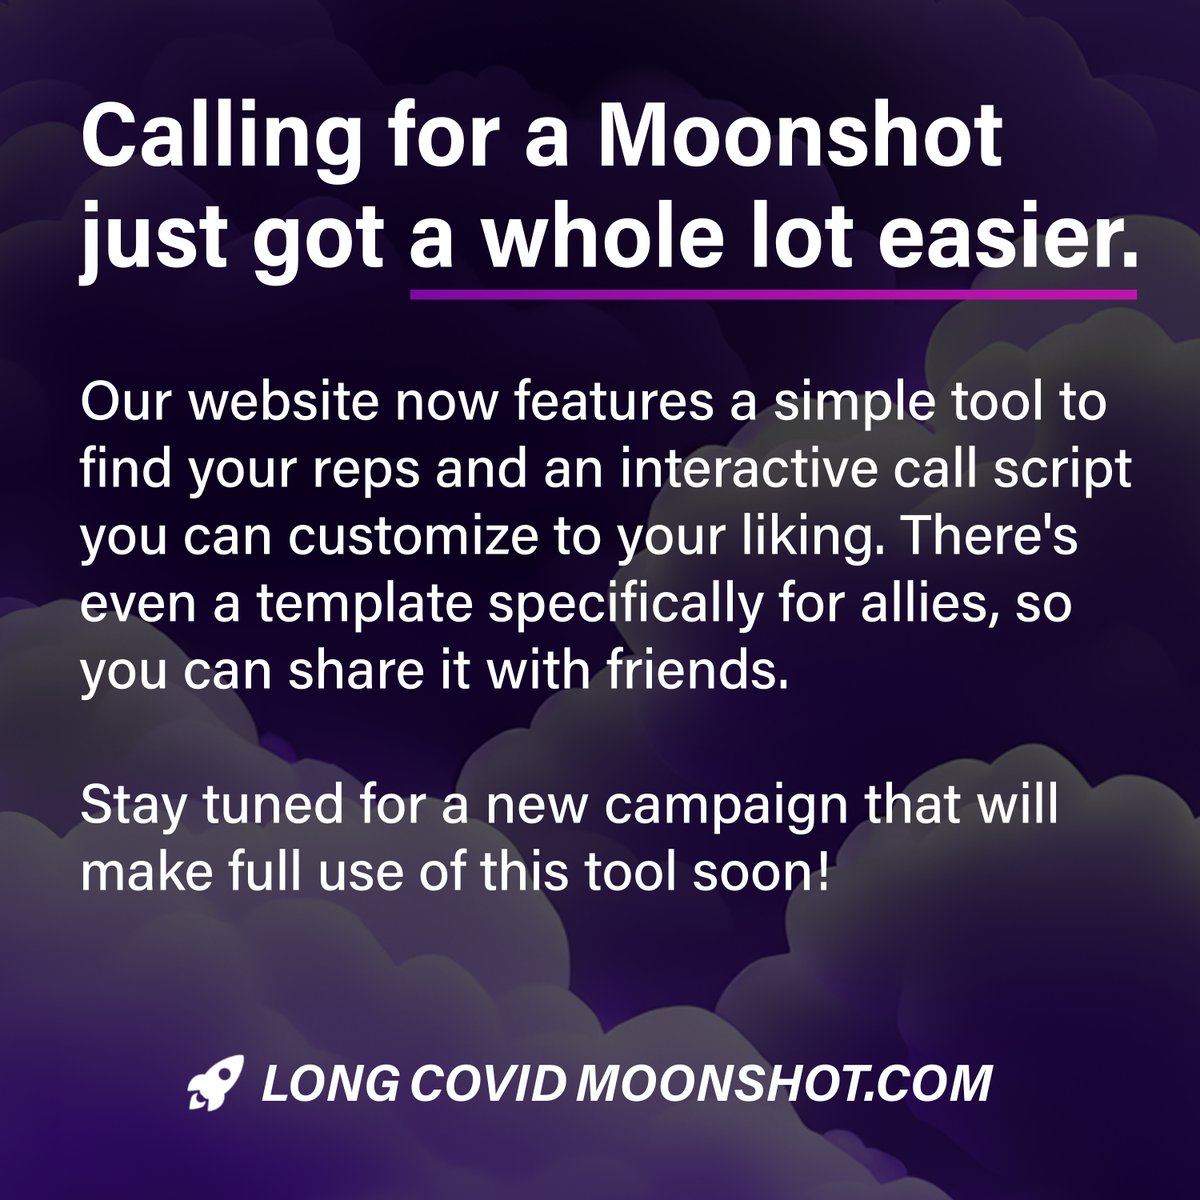 Our website has a brand new, interactive call guide! It’s now easier than ever to find & contact your legislators to demand funding for #LongCovid. Check it out: longcovidmoonshot.com/call-guide